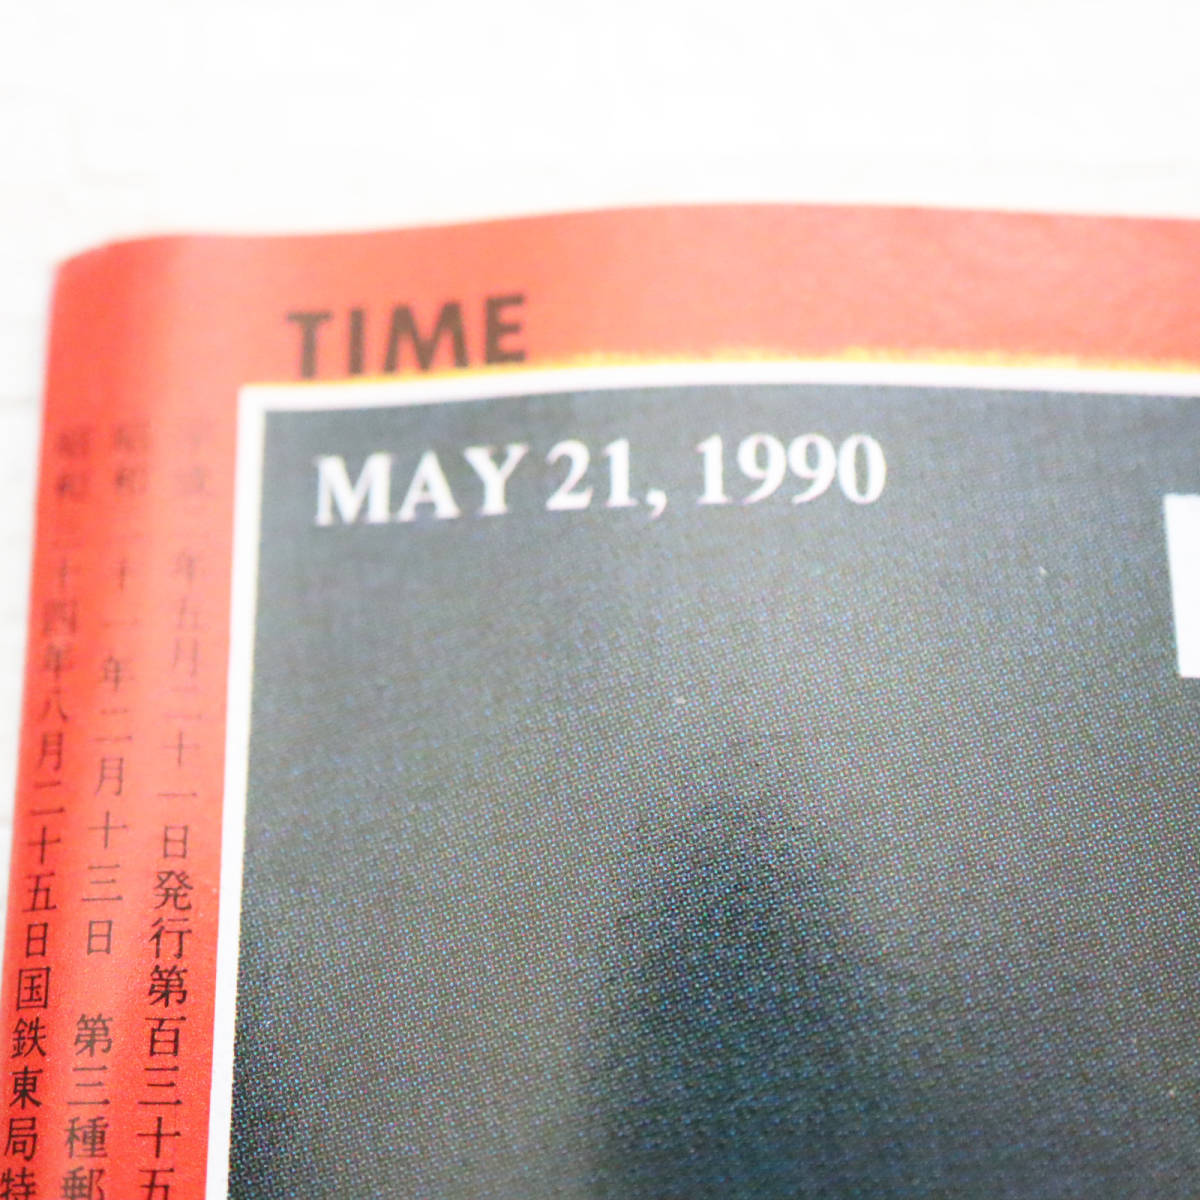 2333　TIME タイム　雑誌　タイムジャパン　1990年5月21日発行　週刊誌　古雑誌　古書　古本　美品_画像2